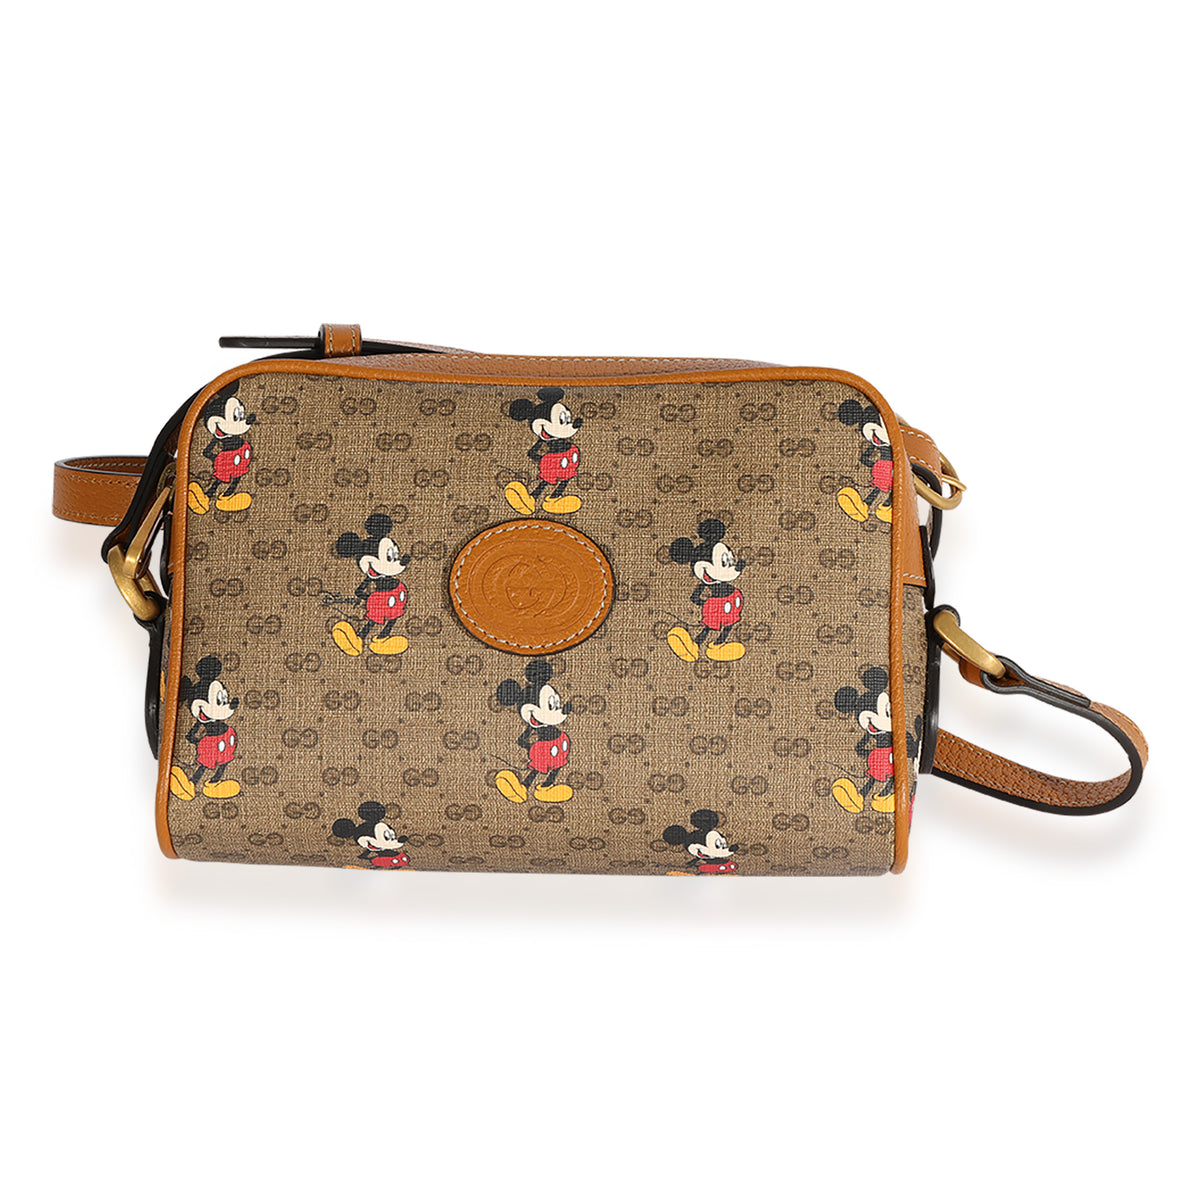 Authenticated Used Gucci x Disney GG Supreme 603938 Mickey Collaboration  Shoulder Bag 